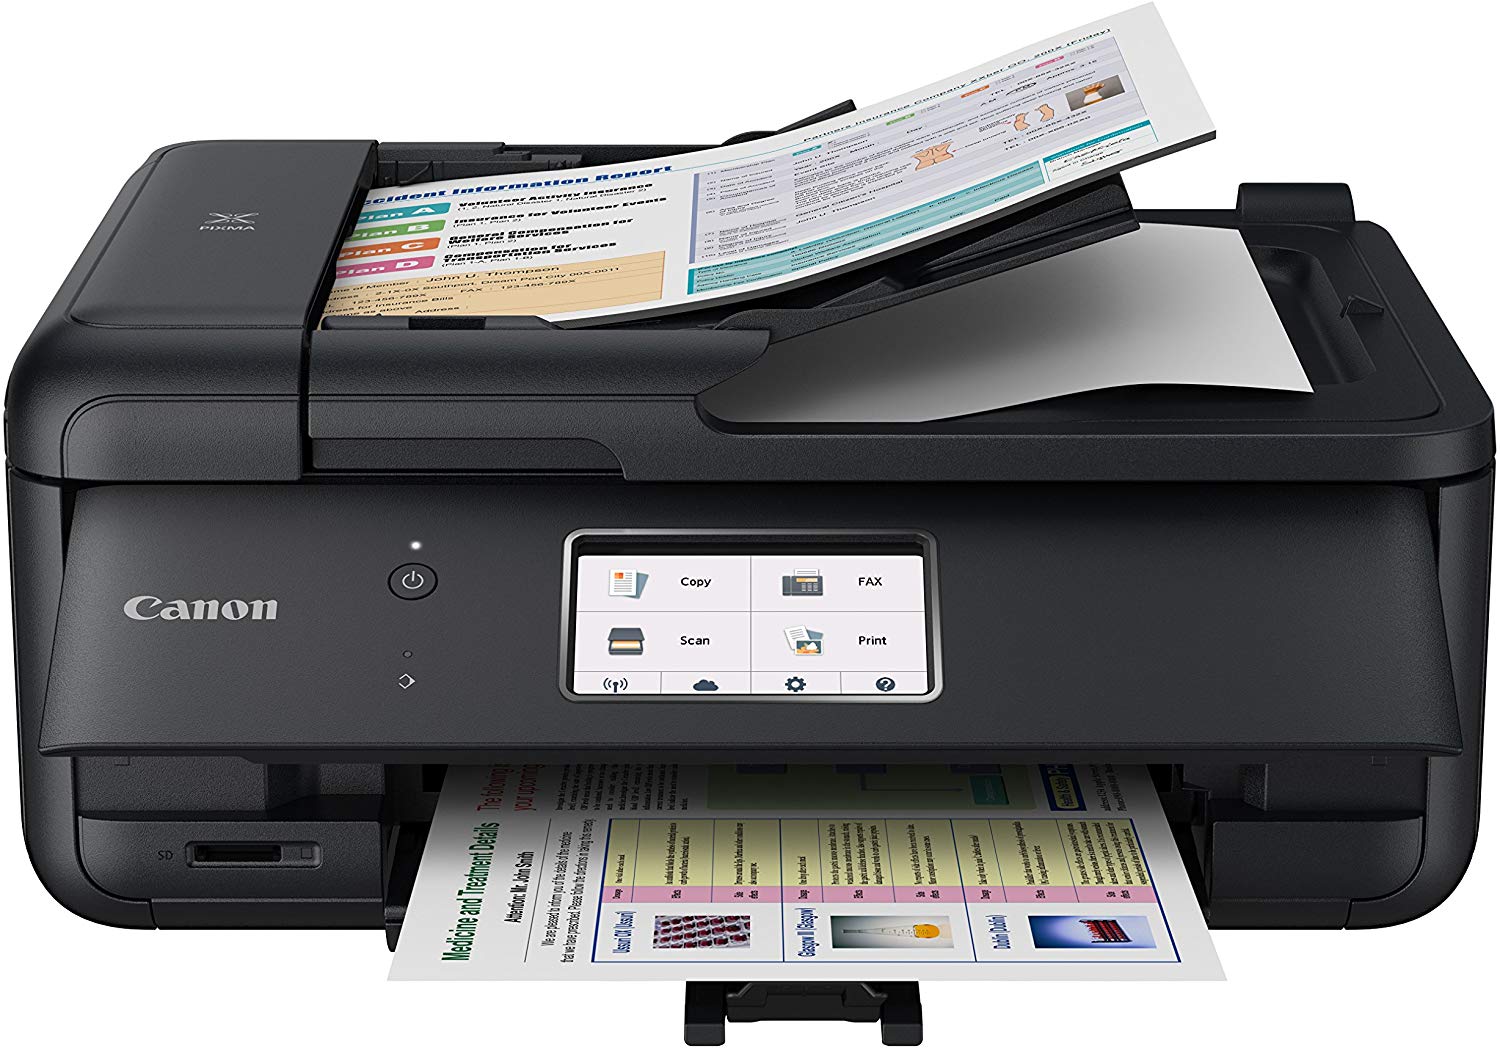 Top 8 Best Canon Printers in 2022 - Reviews and Comparison